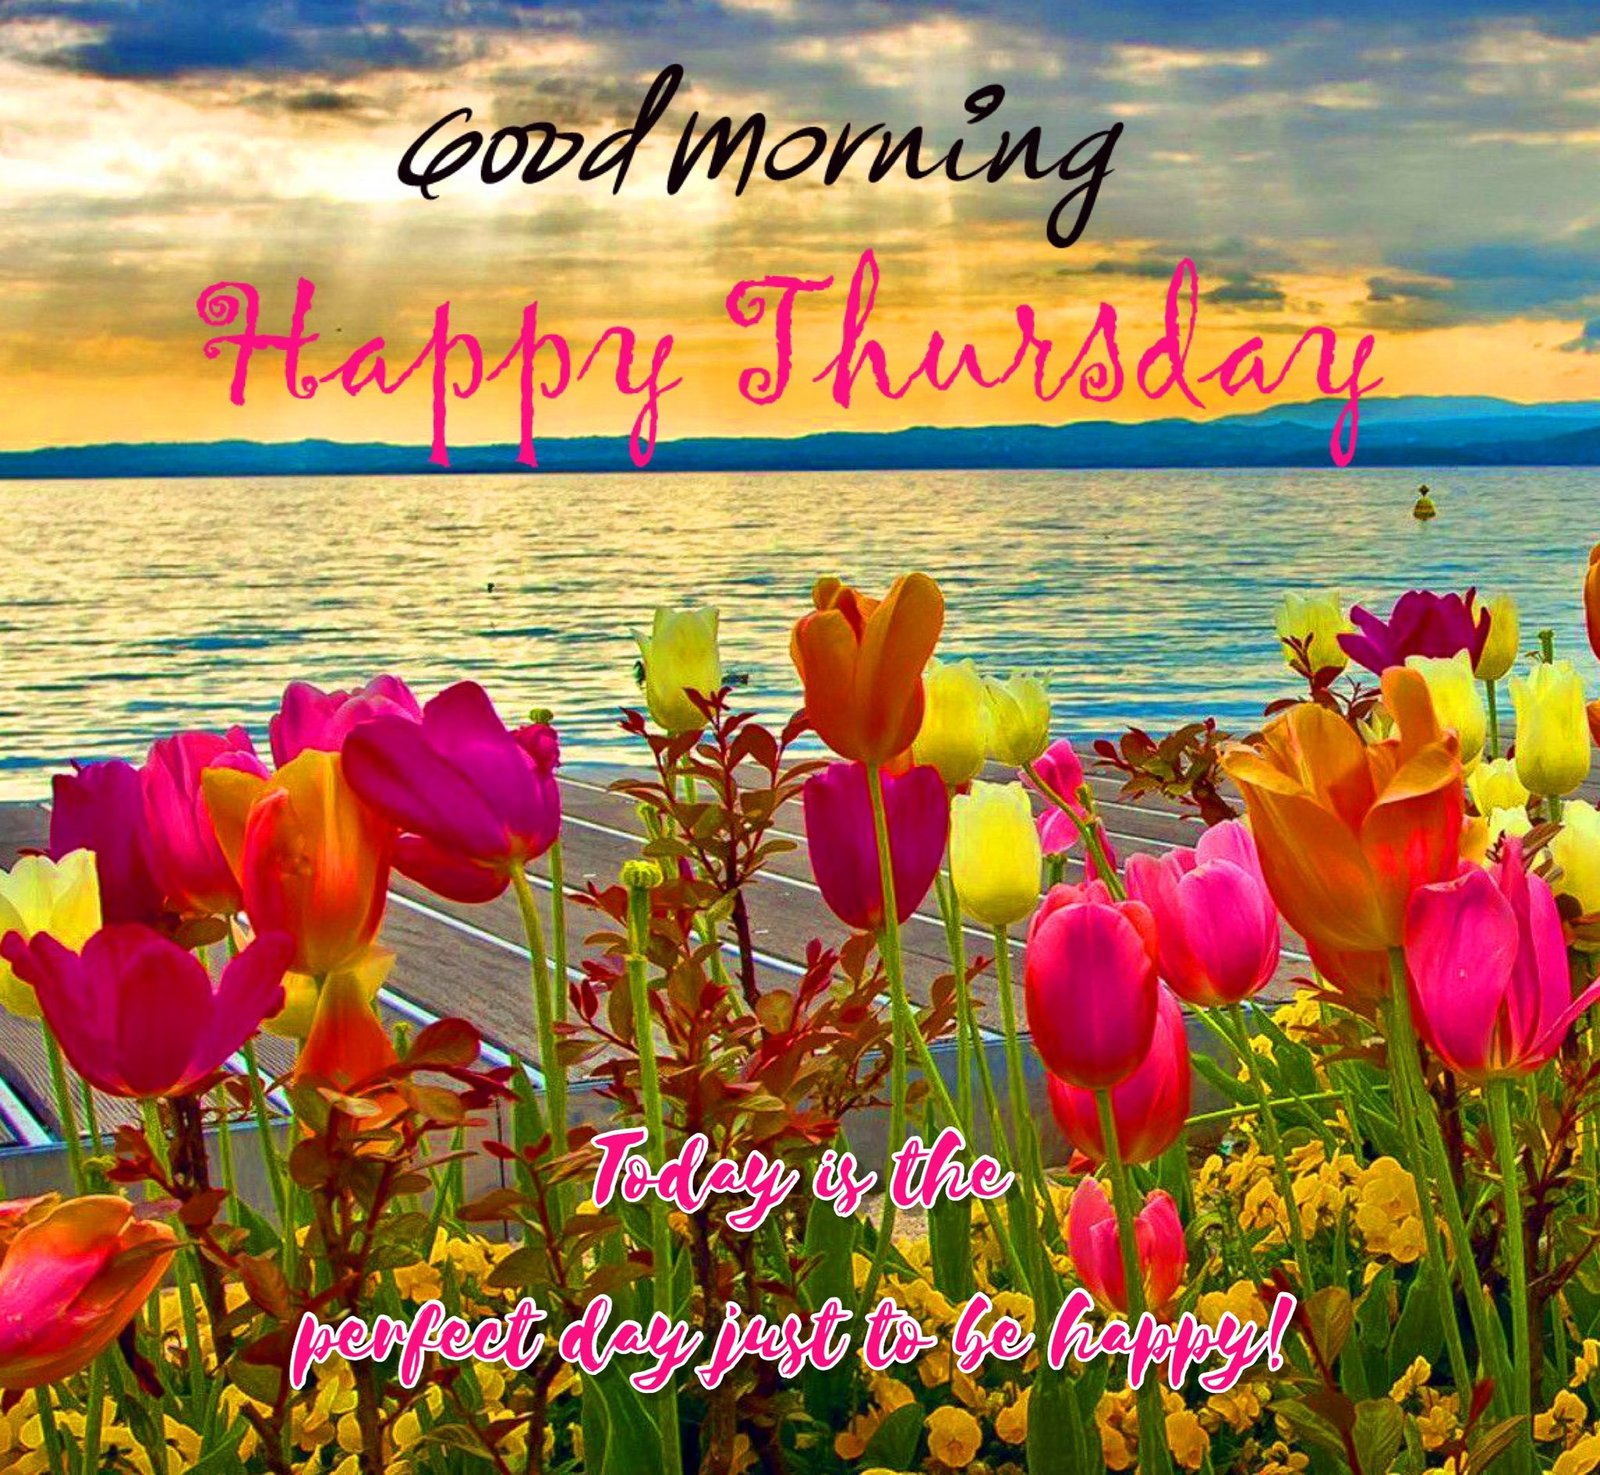 Good Morning Happy Thursday Today Is A Perfect Day Status